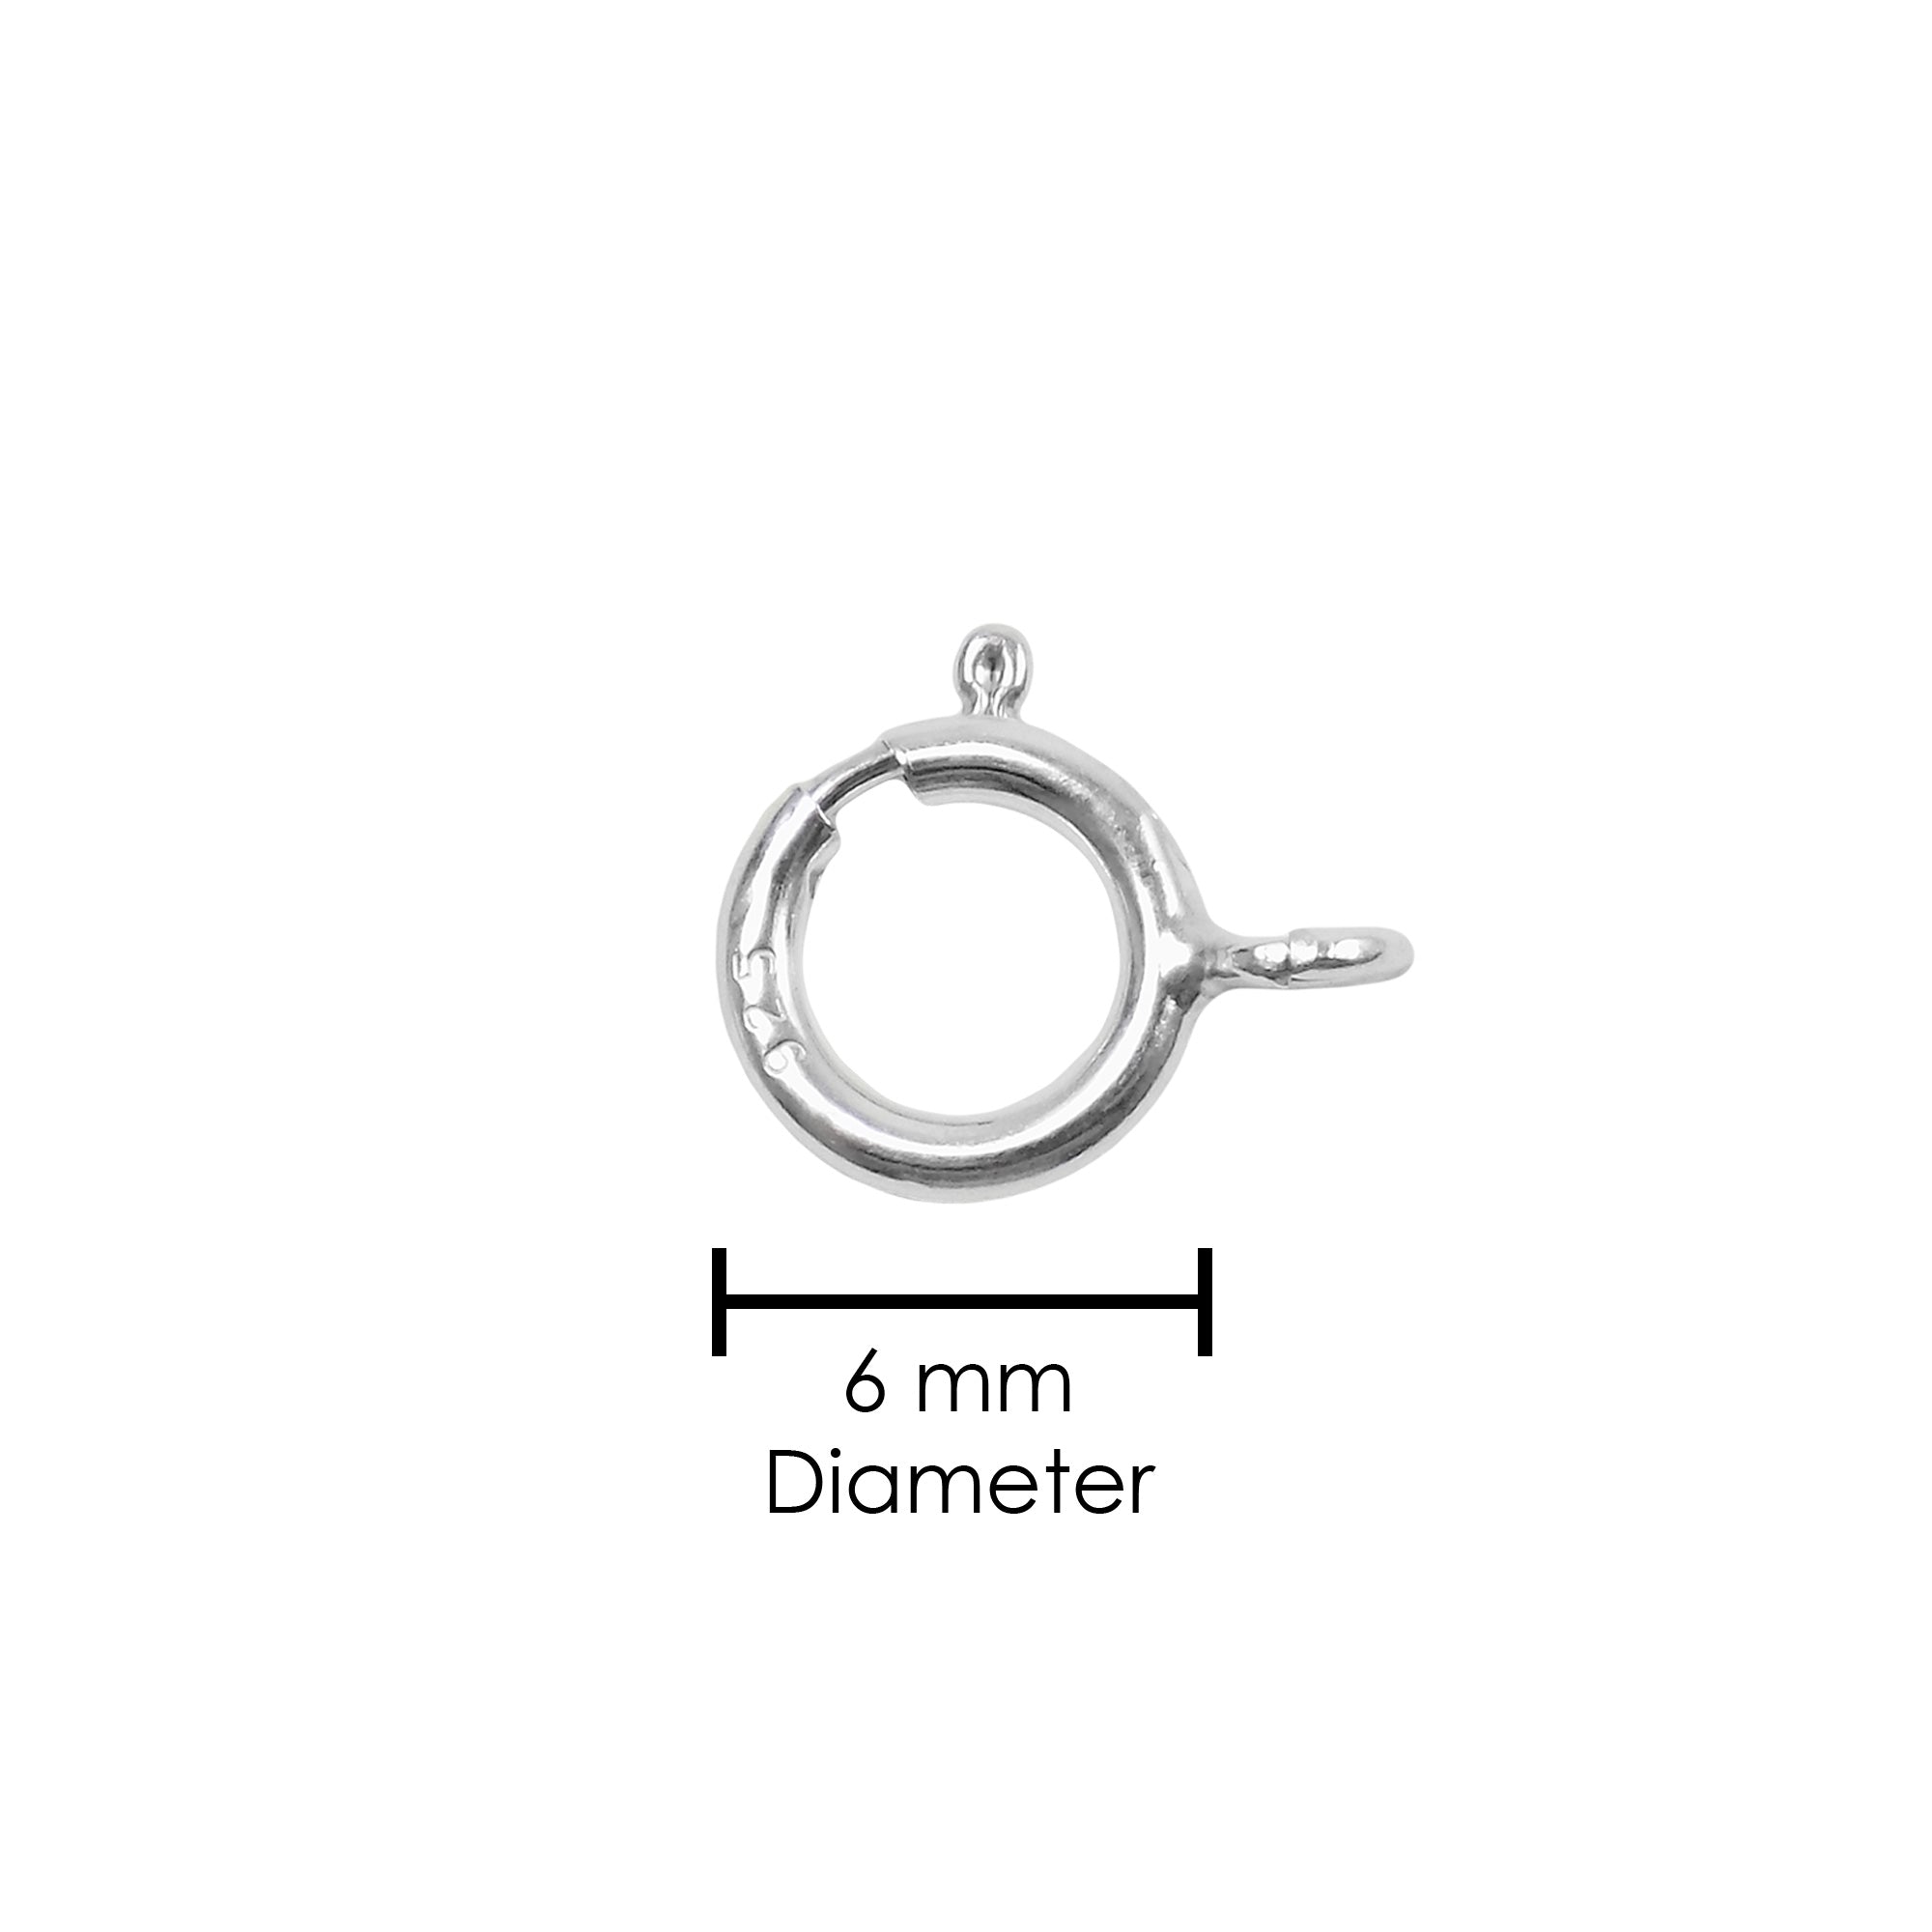 6mm Spring Ring Clasp Closed Ring Italy 925 Sterling Silver. spring ring clasp wholesale